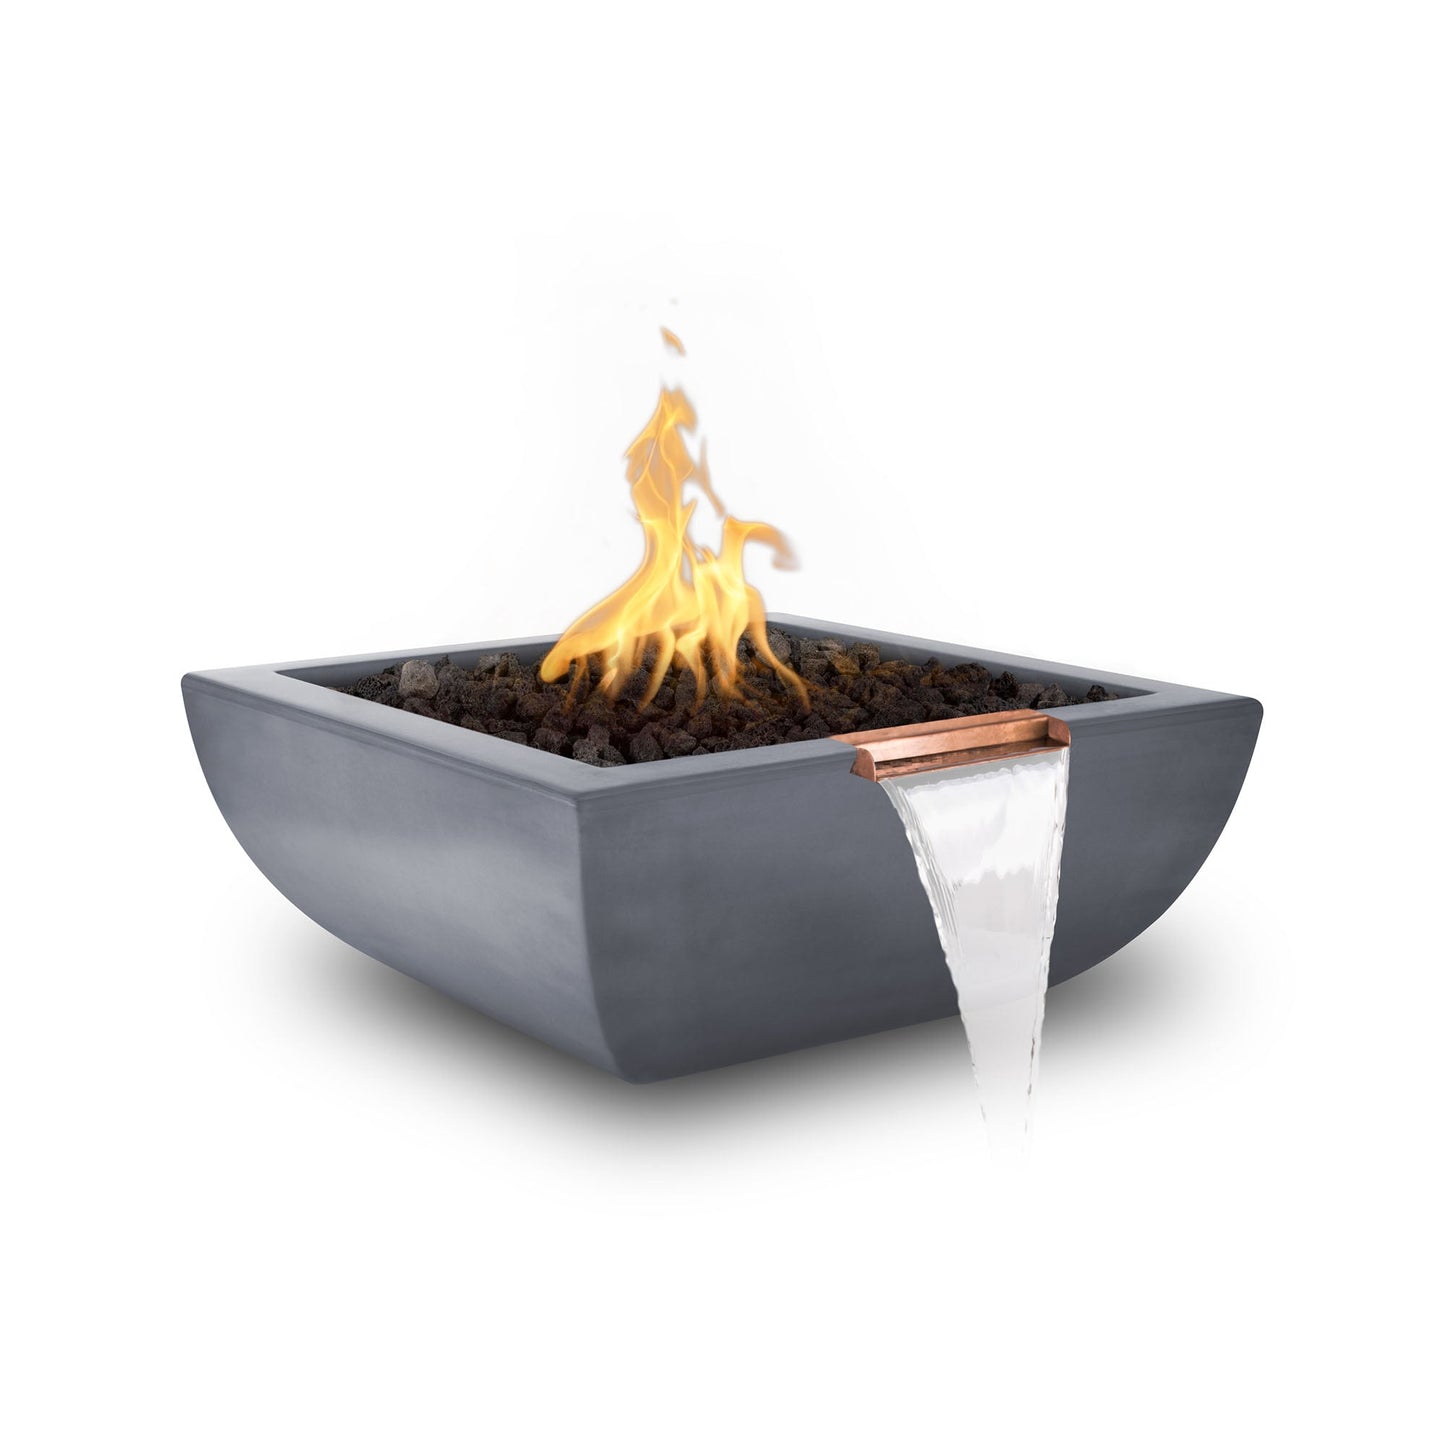 The Outdoor Plus Square Avalon 30" Gray GFRC Concrete Natural Gas Fire & Water Bowl with Match Lit with Flame Sense Ignition